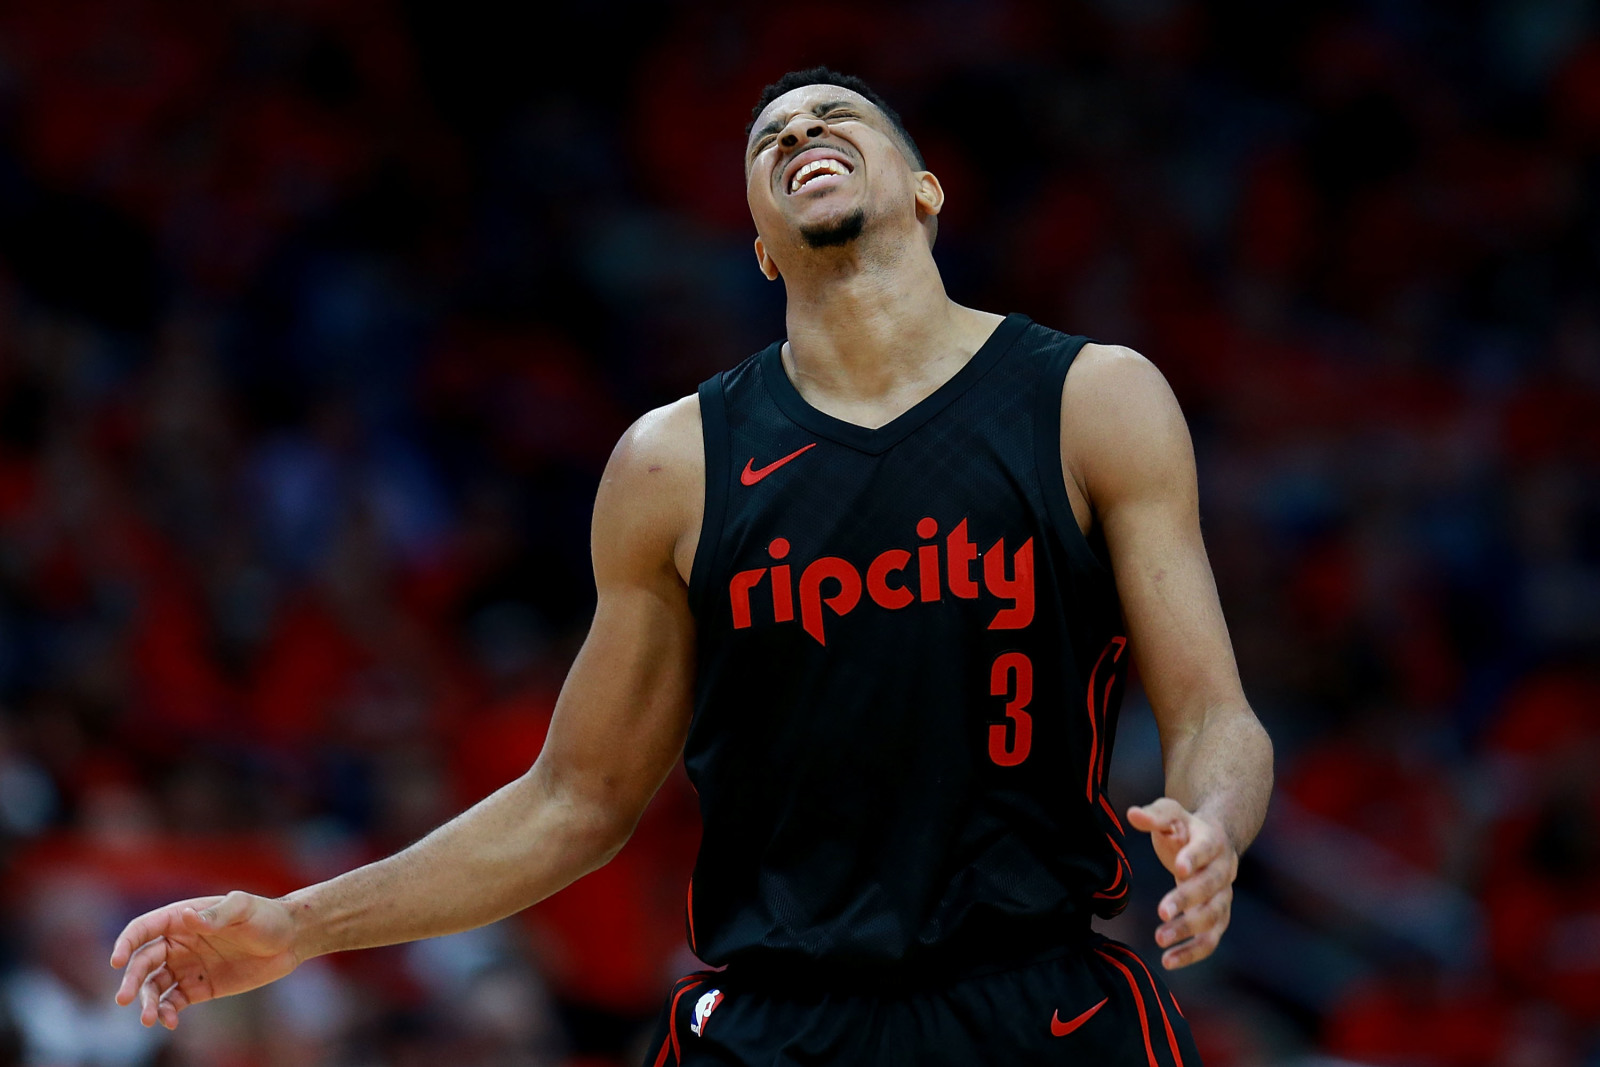 Philadelphia 76ers: Should they make an offer for C.J. McCollum